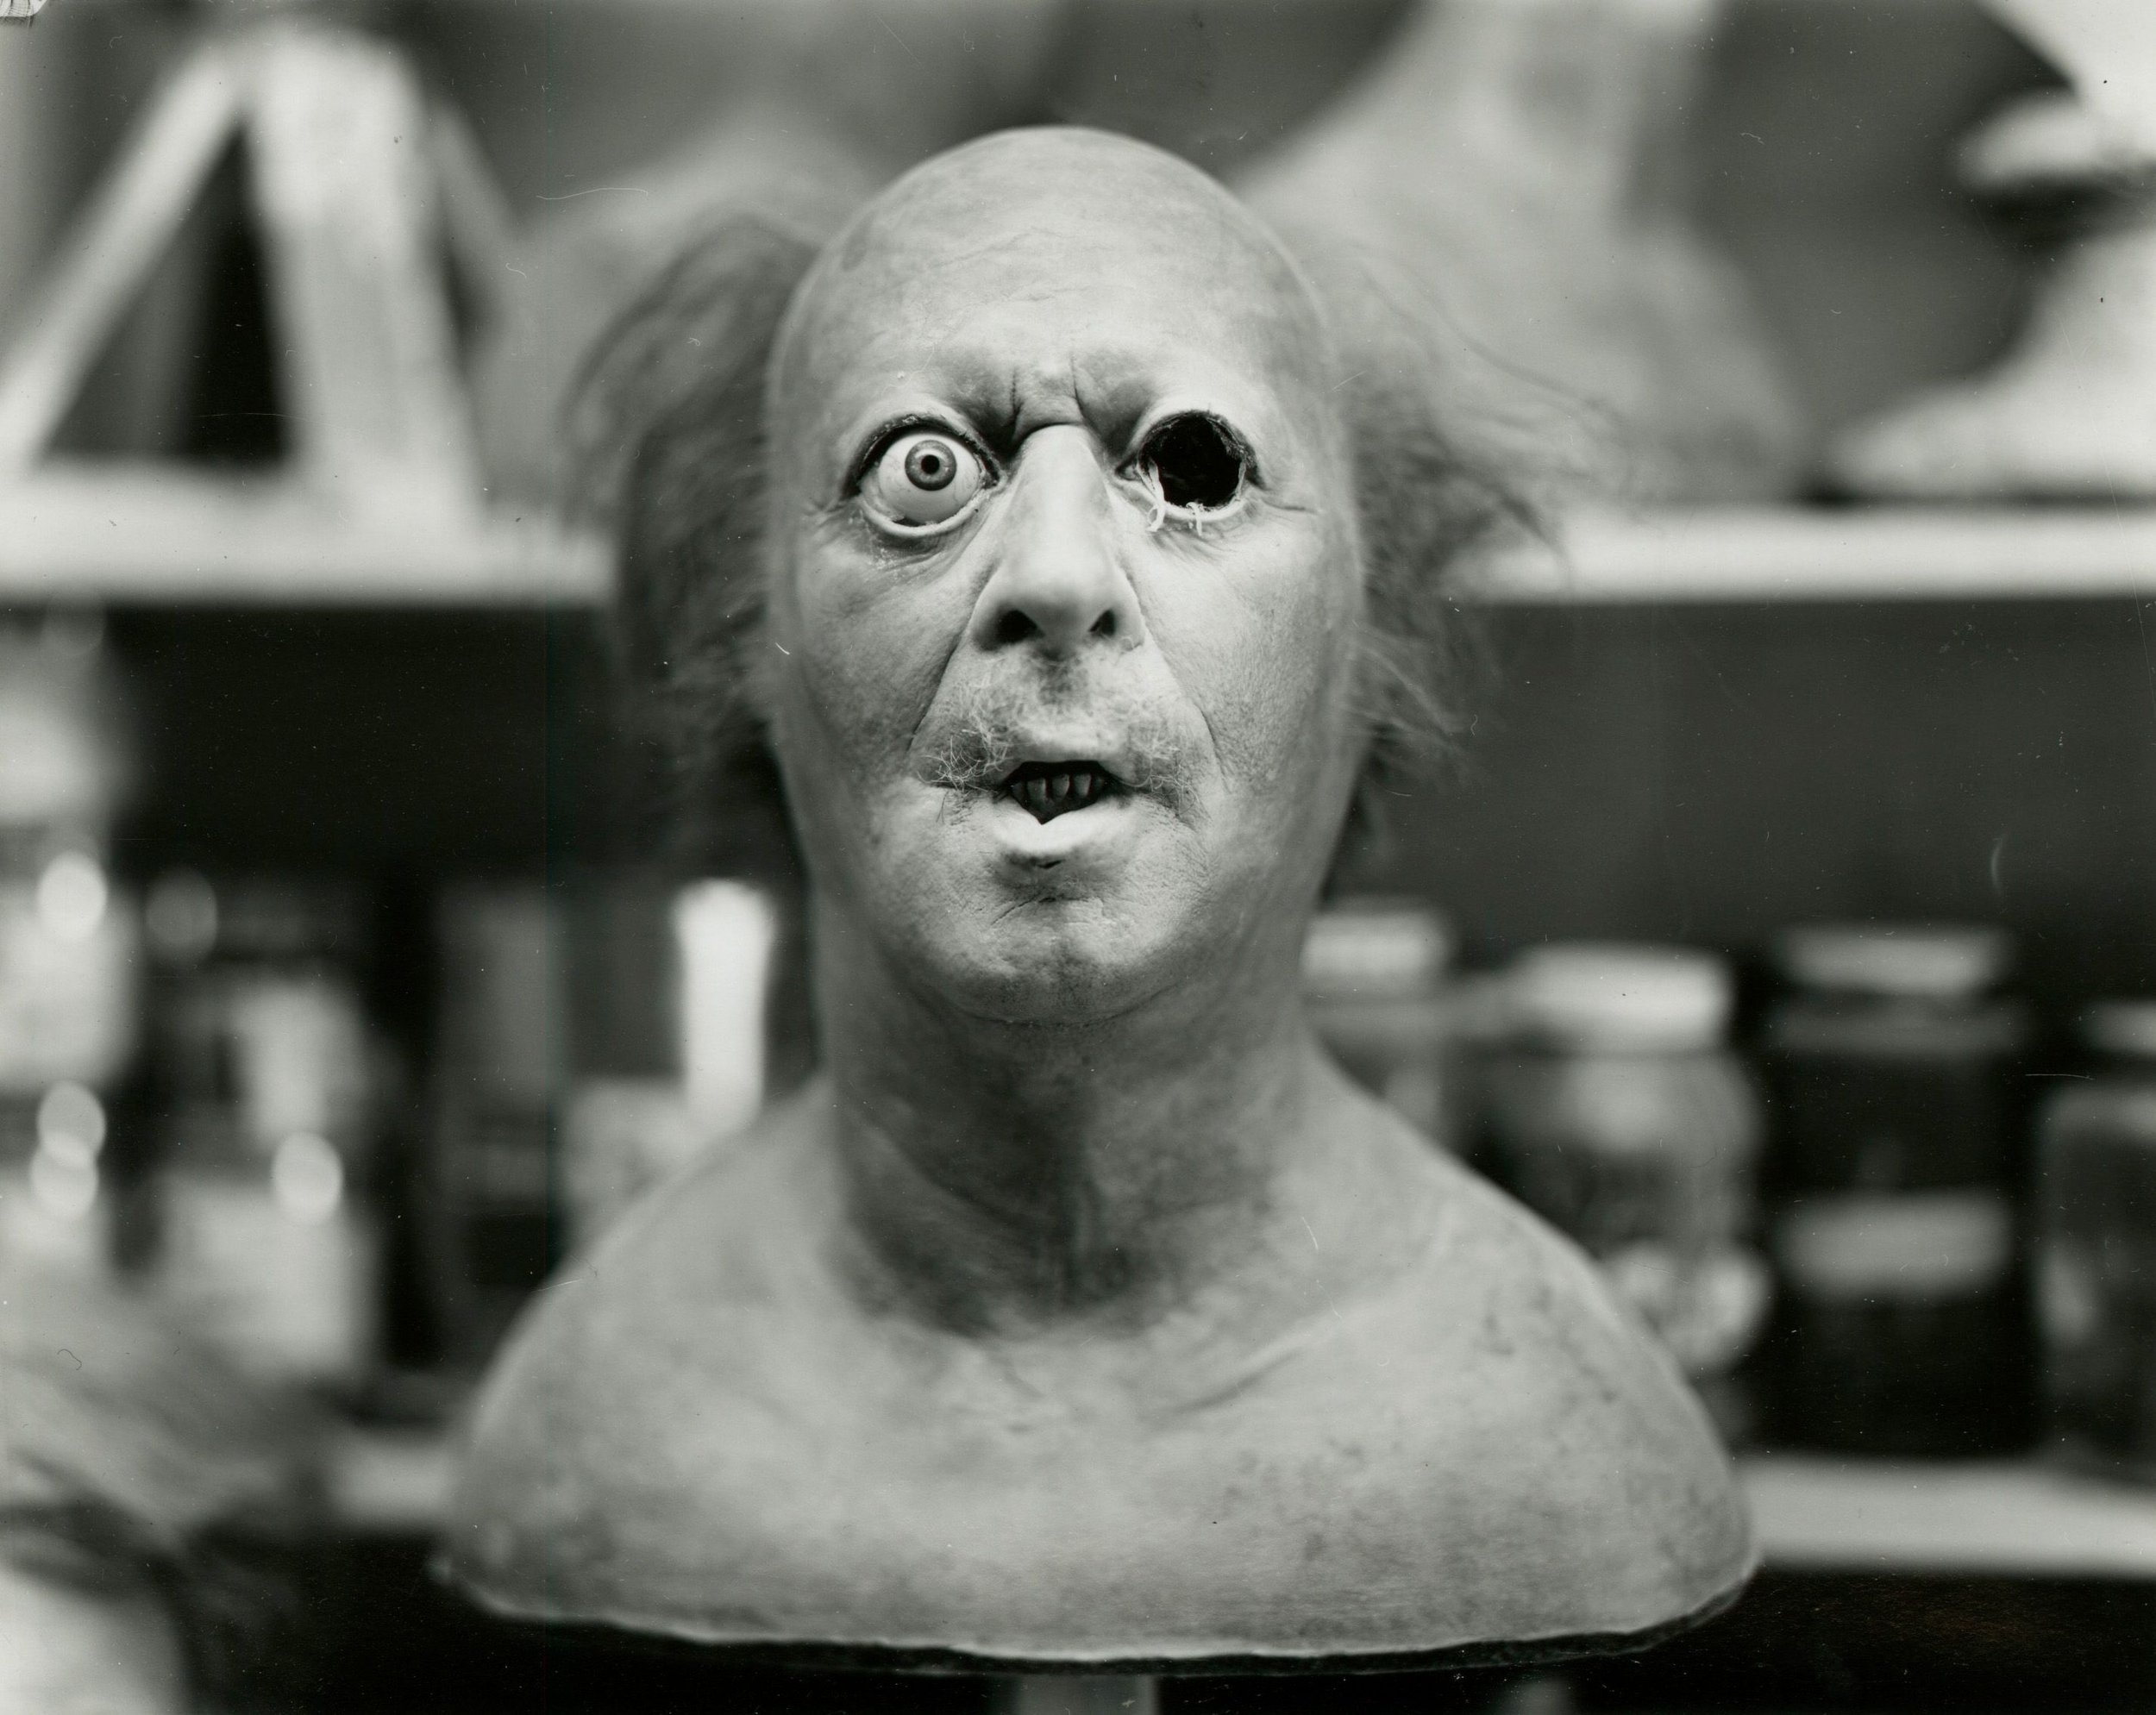  Robert Cumming,  Death Head; Feature Film, “Jaws”. Make-up Lab. May 13, 1977 , Vintage gelatin silver contact print, signature stamp on verso, 8” x 10” print, mat &amp; frame 14” x 18”, Edition of 3 